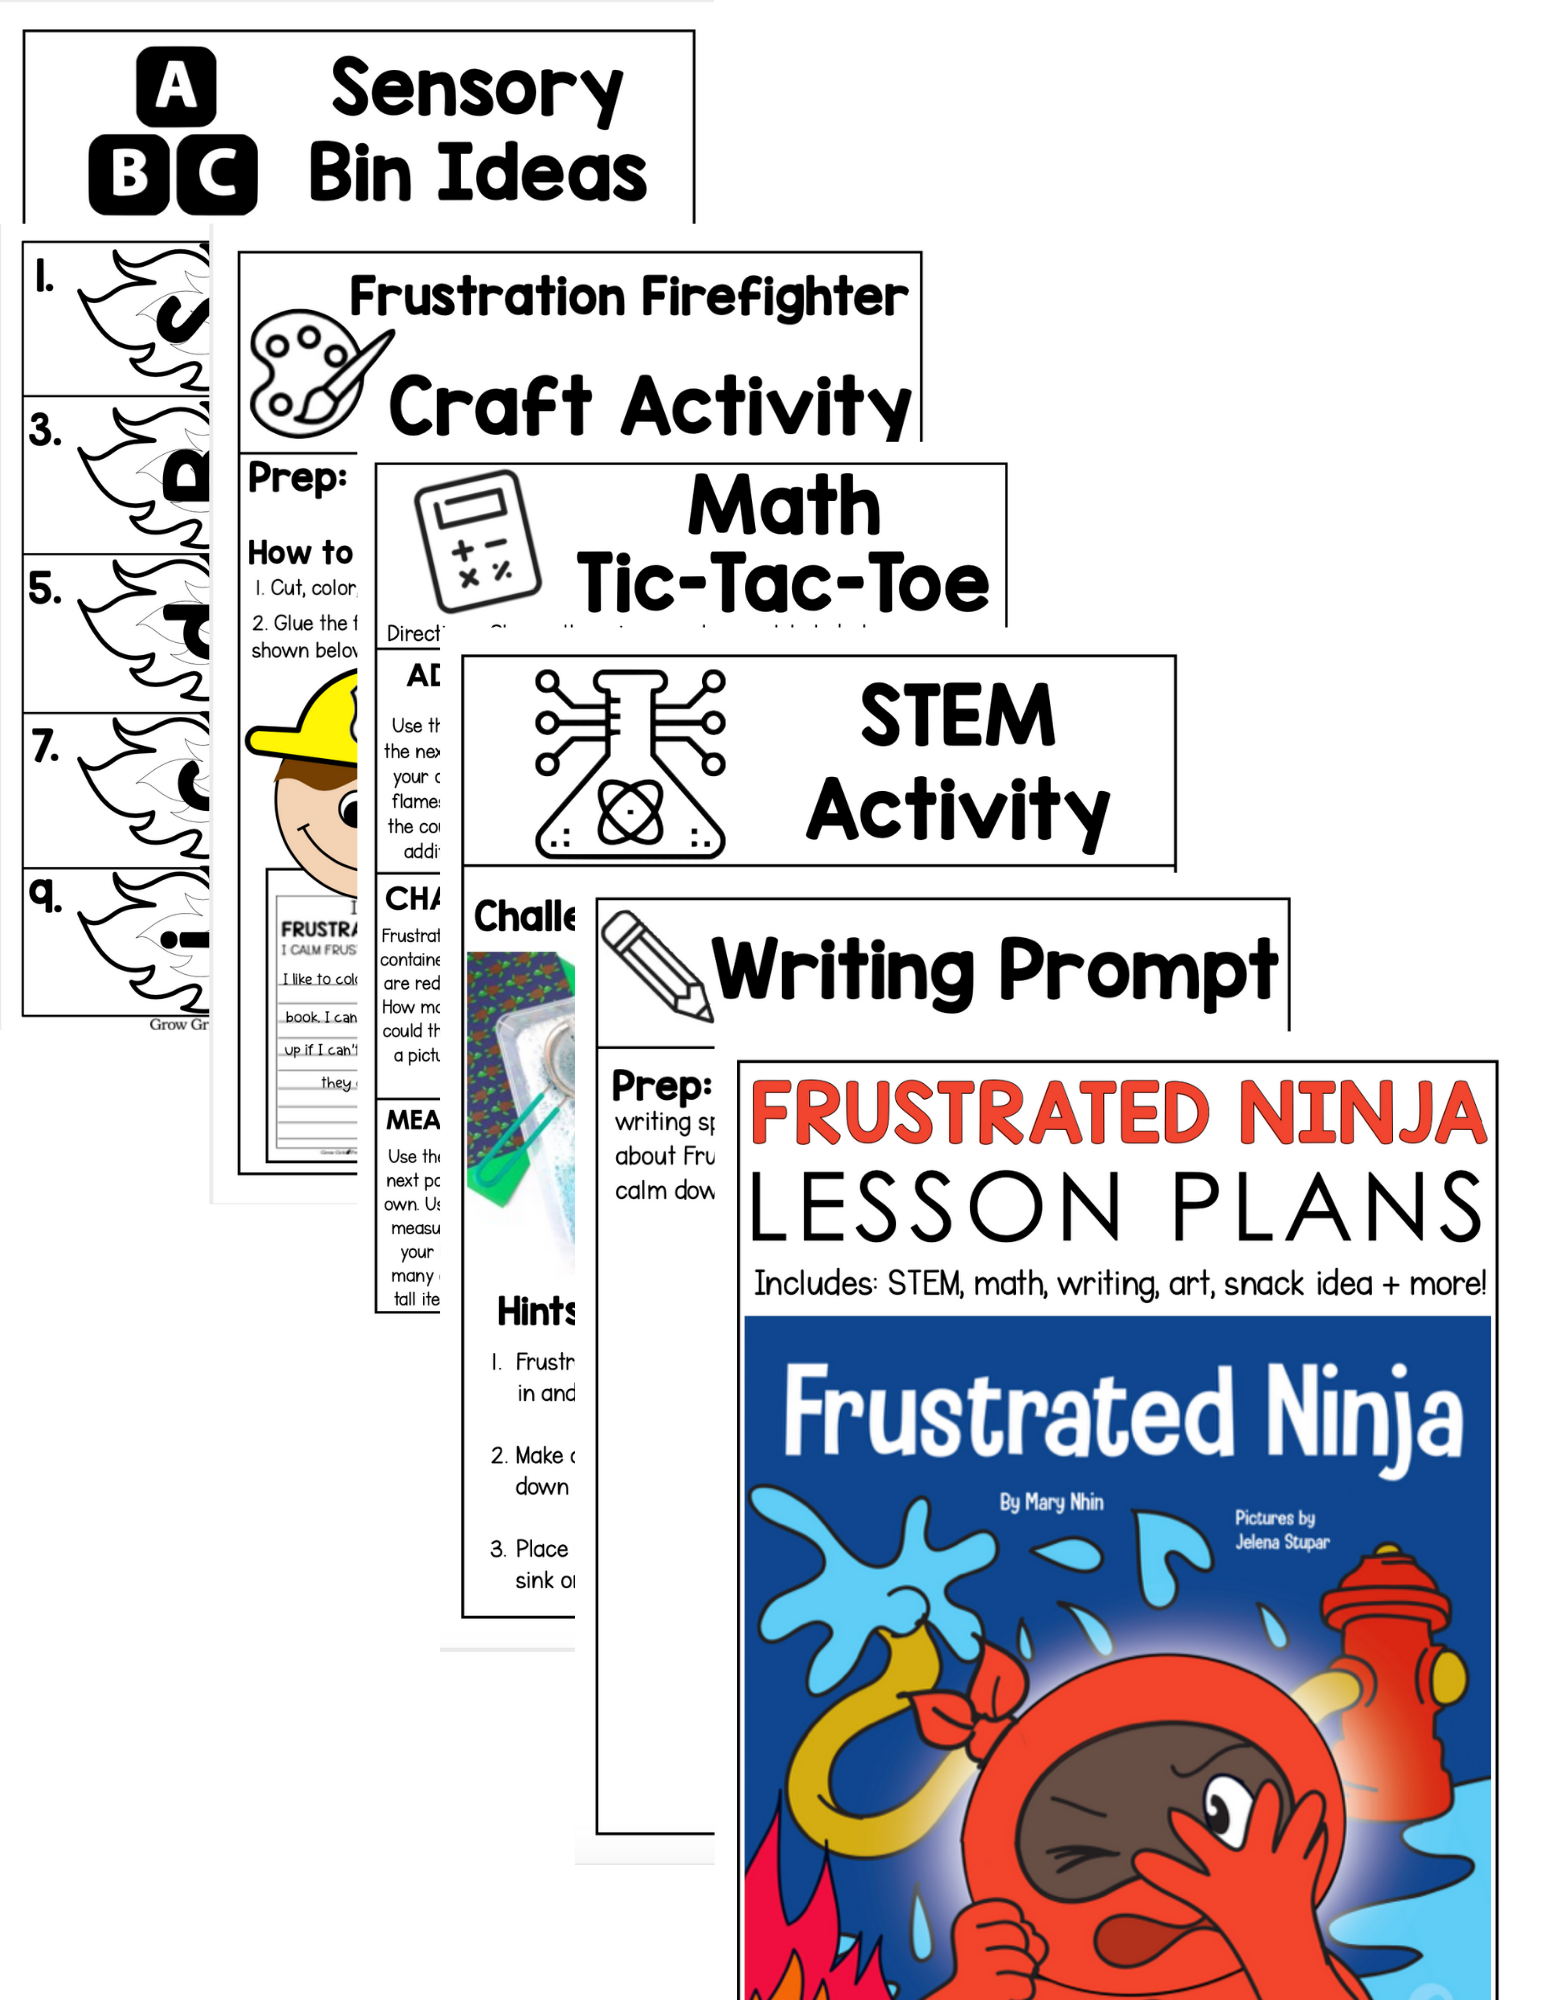 Angry Ninja Book Summary, Discussion Questions, & Worksheet